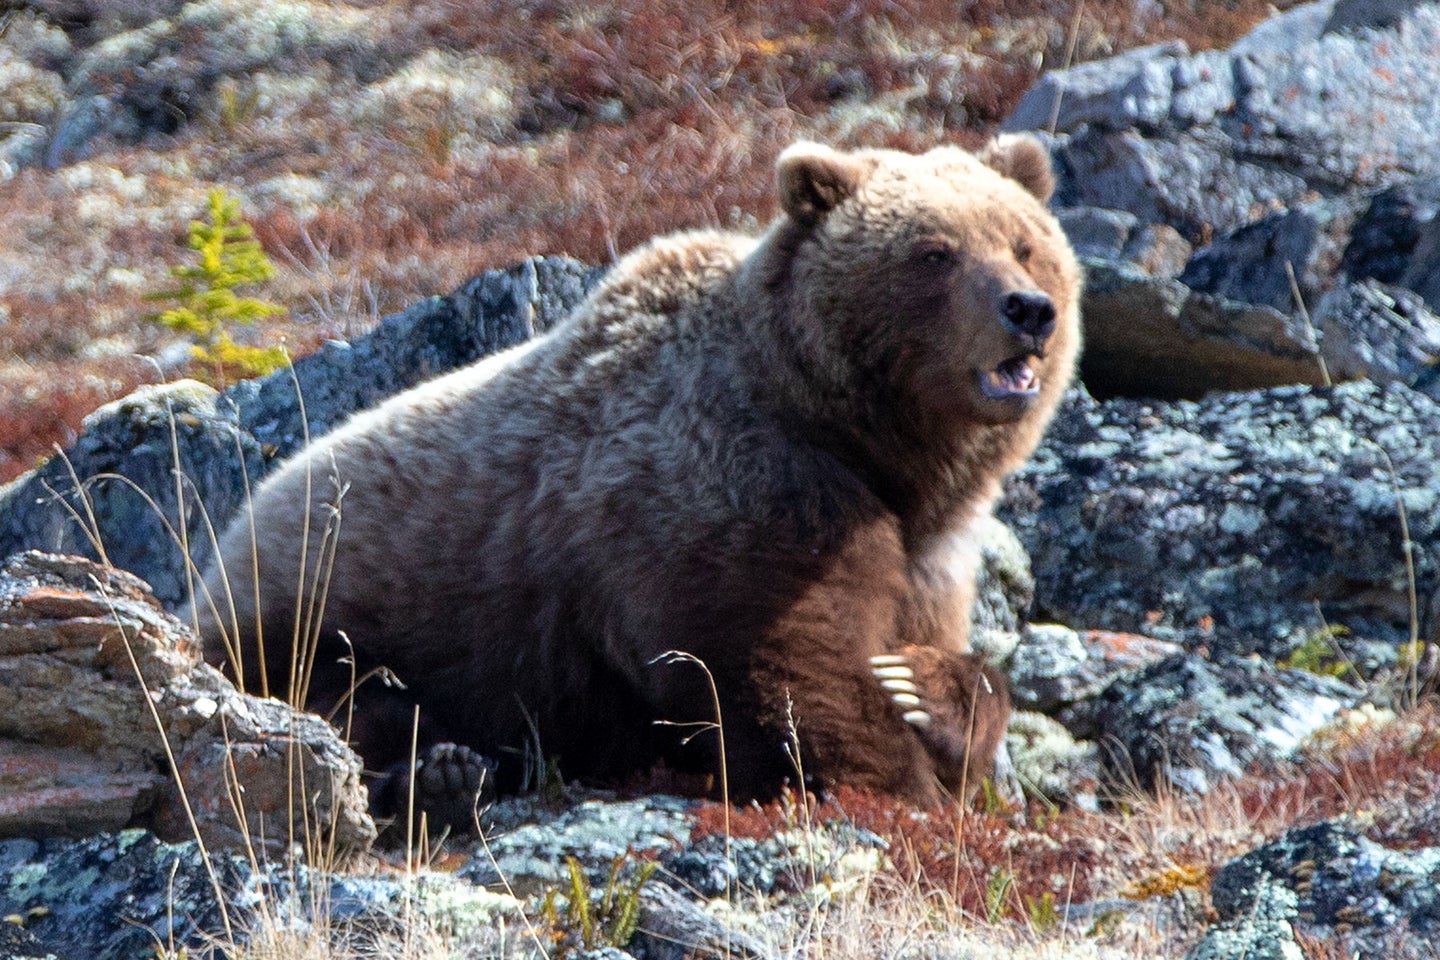 According to recent data collected by the U.S. Fish and Wildlife Service, there are approximately 740 grizzly bears in the Greater Yellowstone Ecosystem. 